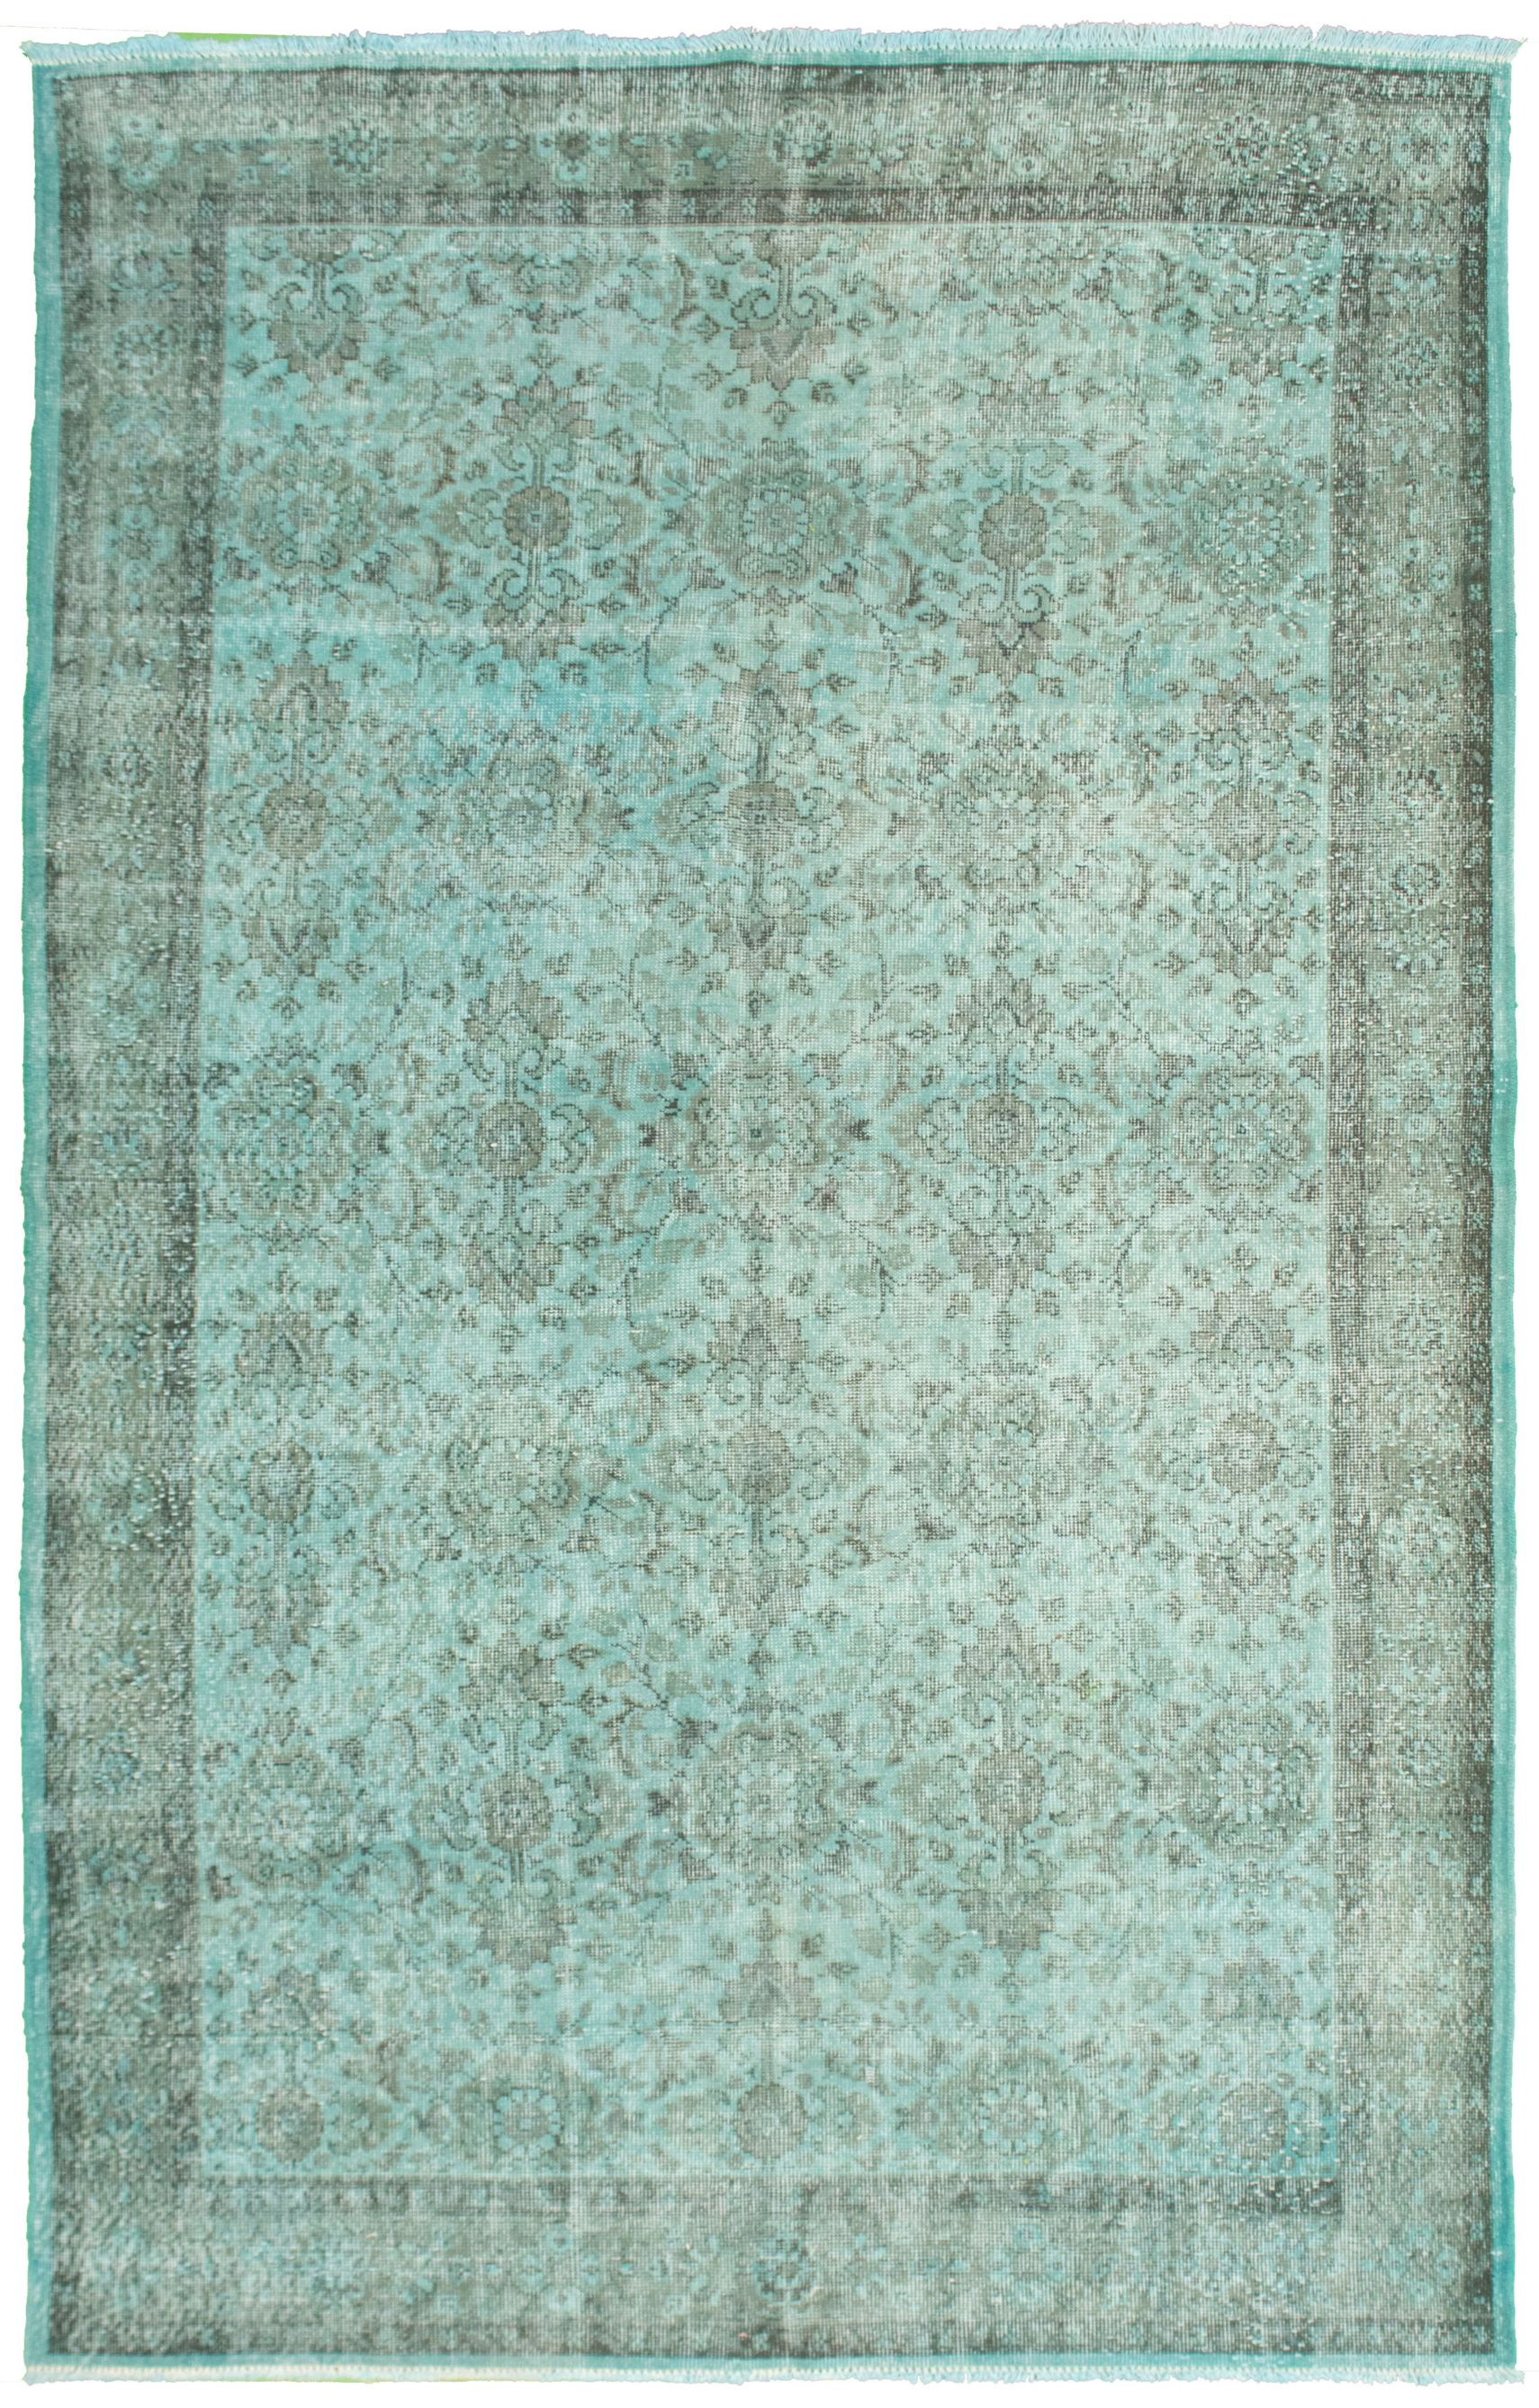 Hand-knotted Color Transition Teal Wool Rug 6'3" x 10'0" Size: 6'3" x 10'0"  